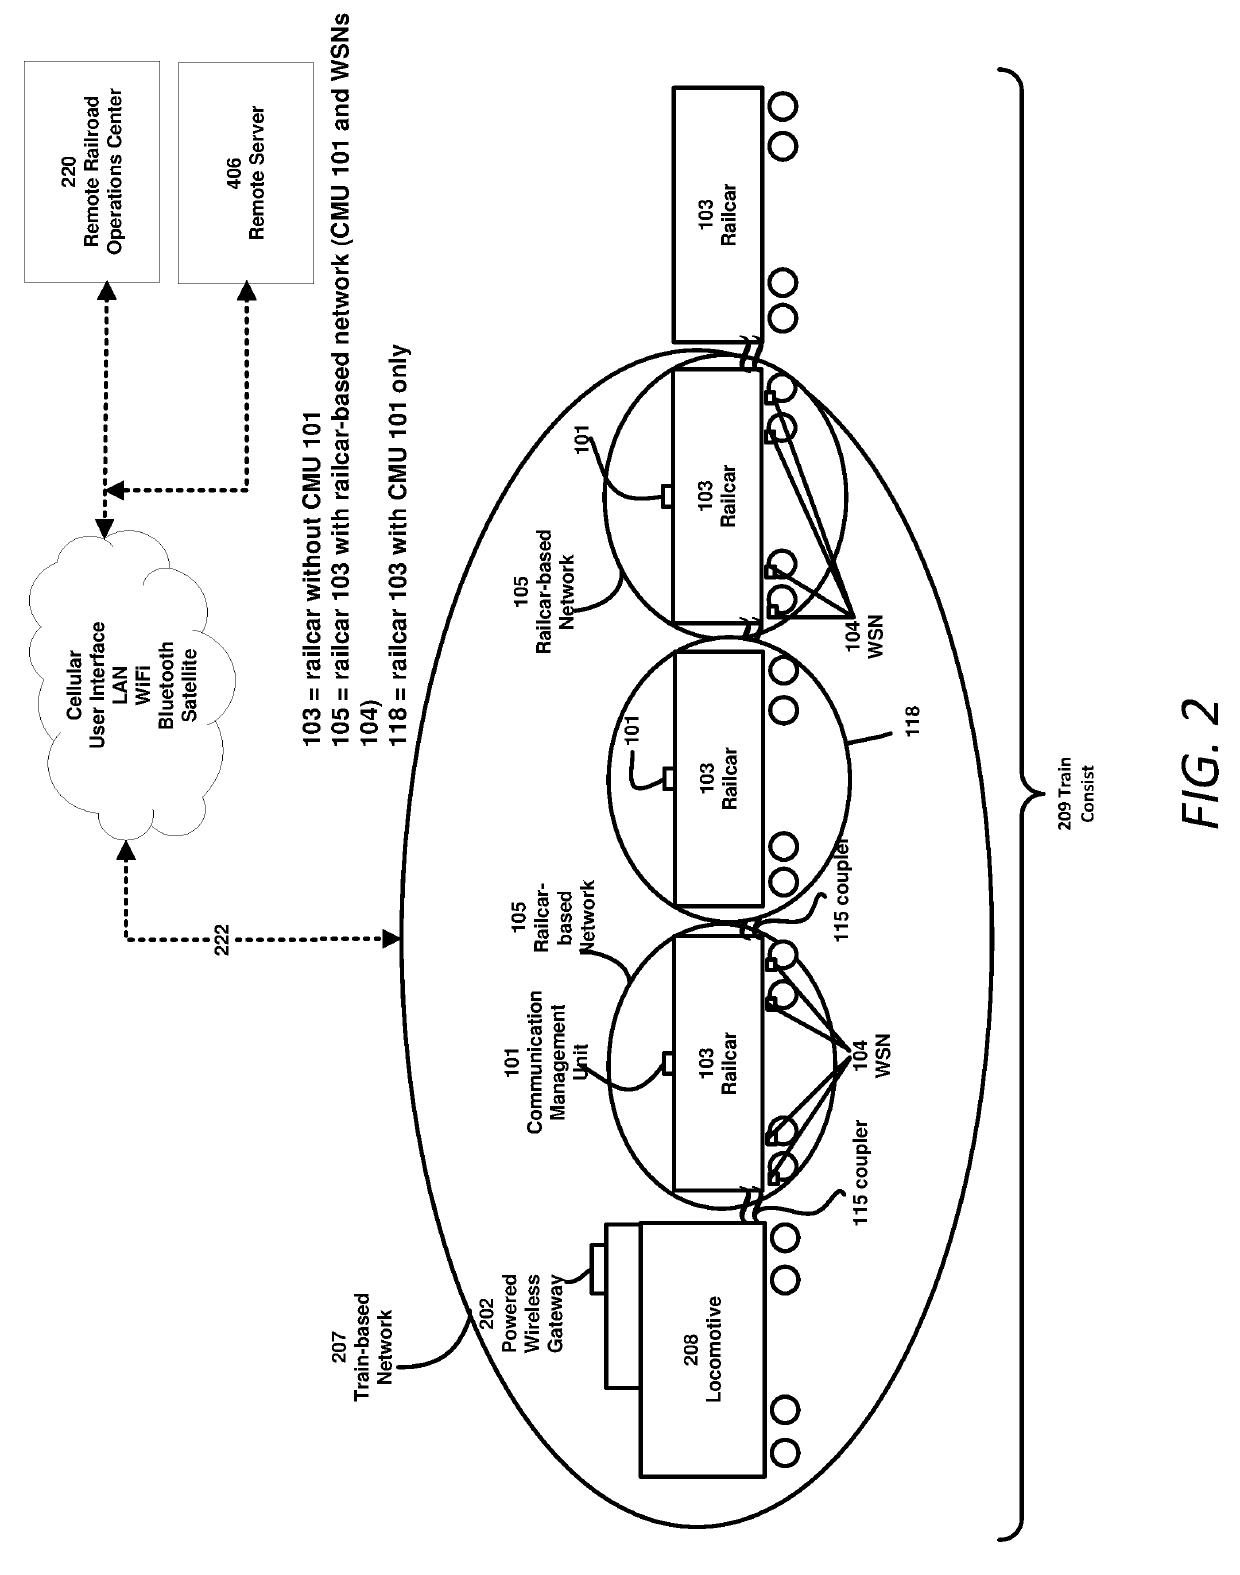 System, Method and Apparatus for Monitoring the Health of Railcar Wheelsets